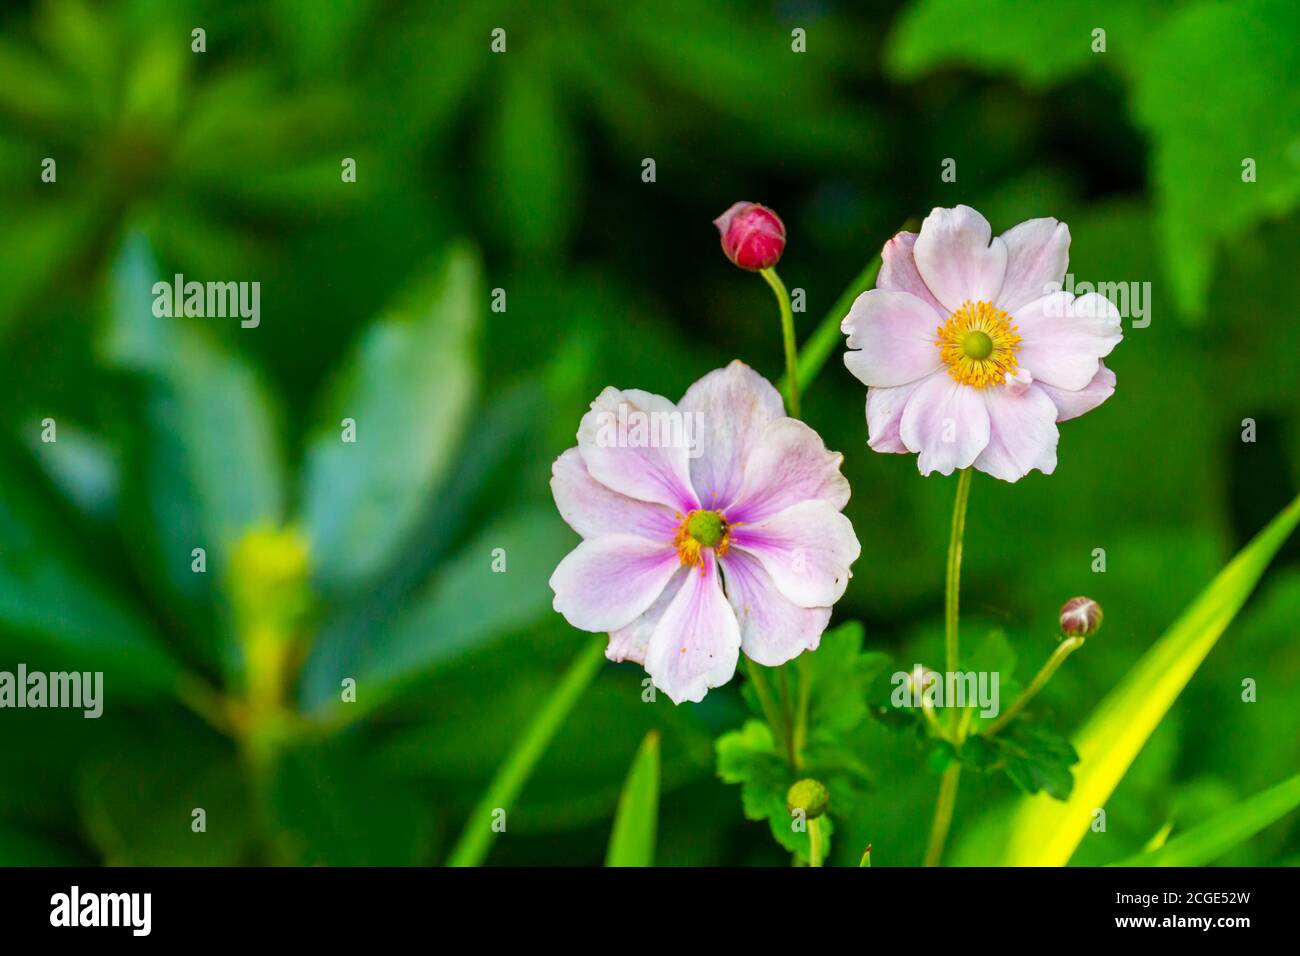 Japanese anemone flowers and buds, (Anemone hupehensis japonica). White pink flowers with yellow stamens and green blurred background. Summer garden Stock Photo